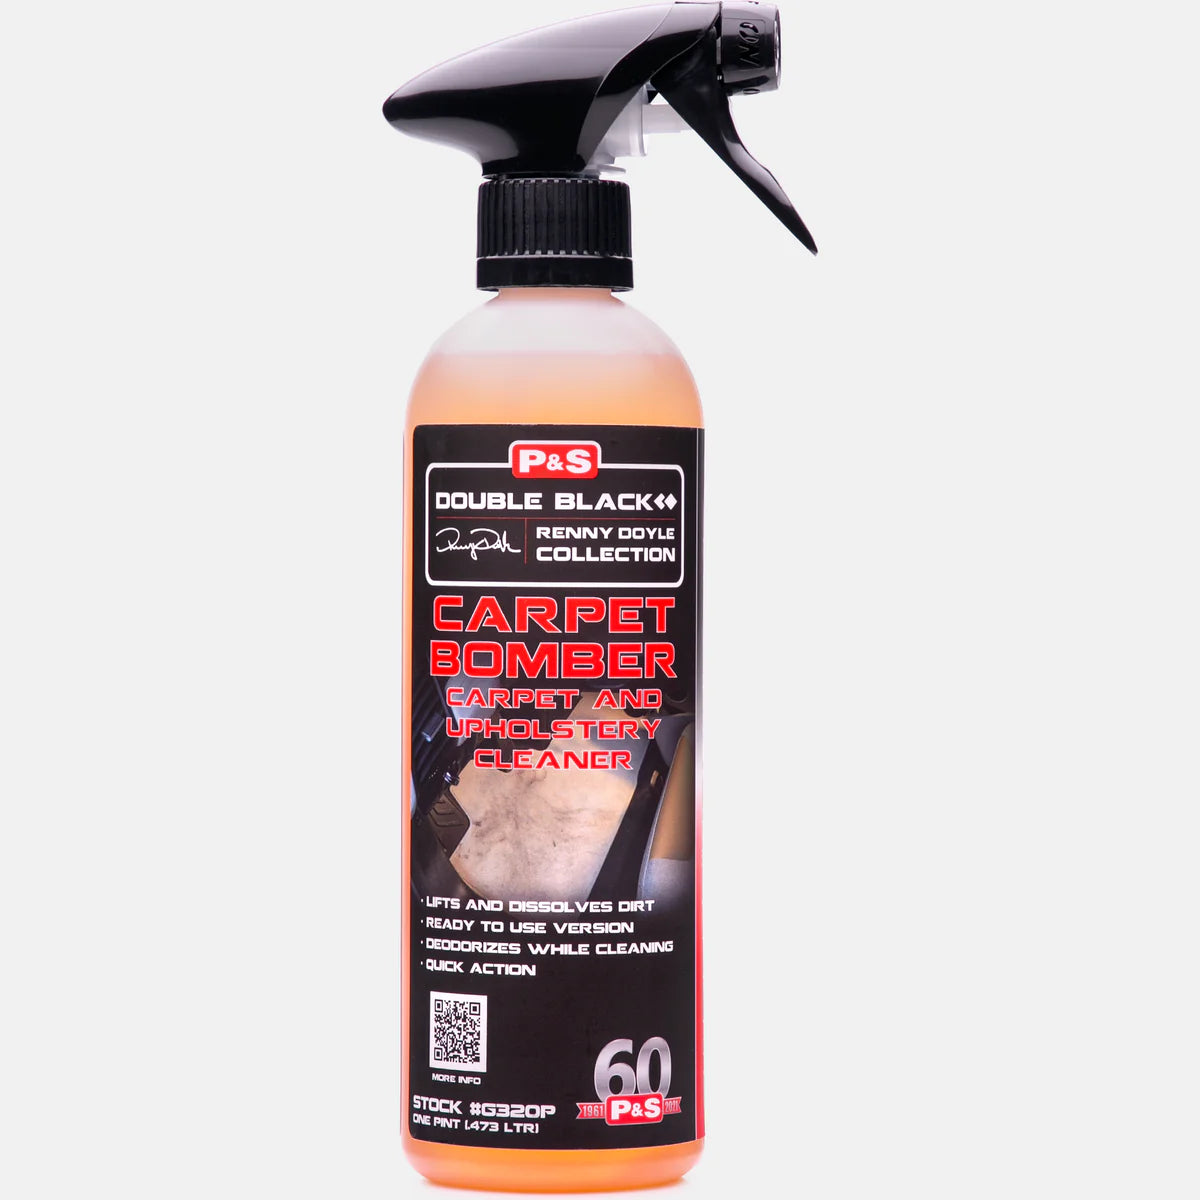 P&S Carpet Bomber Carpet & Upholstery Cleaner pint size container, ready for precise cleaning tasks.